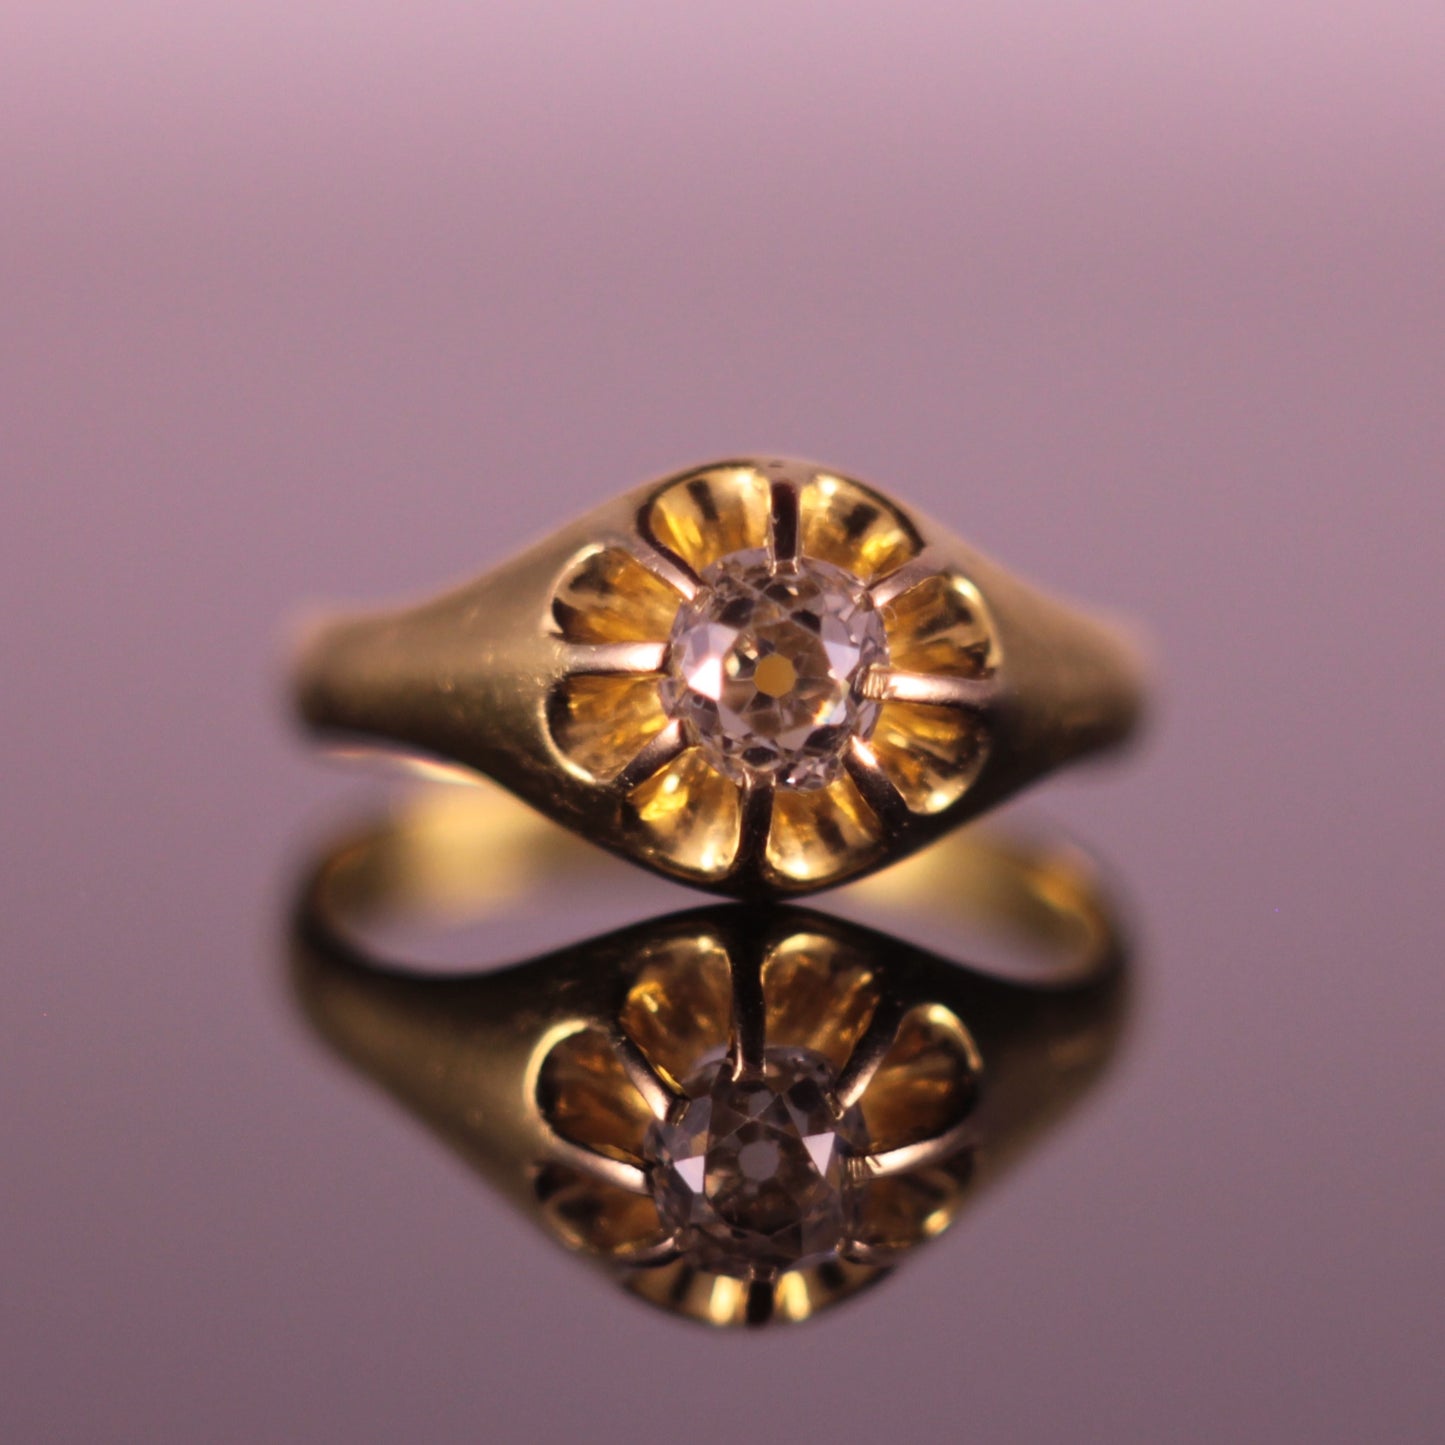 Victorian 0.50ct Antique Diamond Ring Victorian Old Cut Diamond Vintage Ring 18ct Yellow Gold